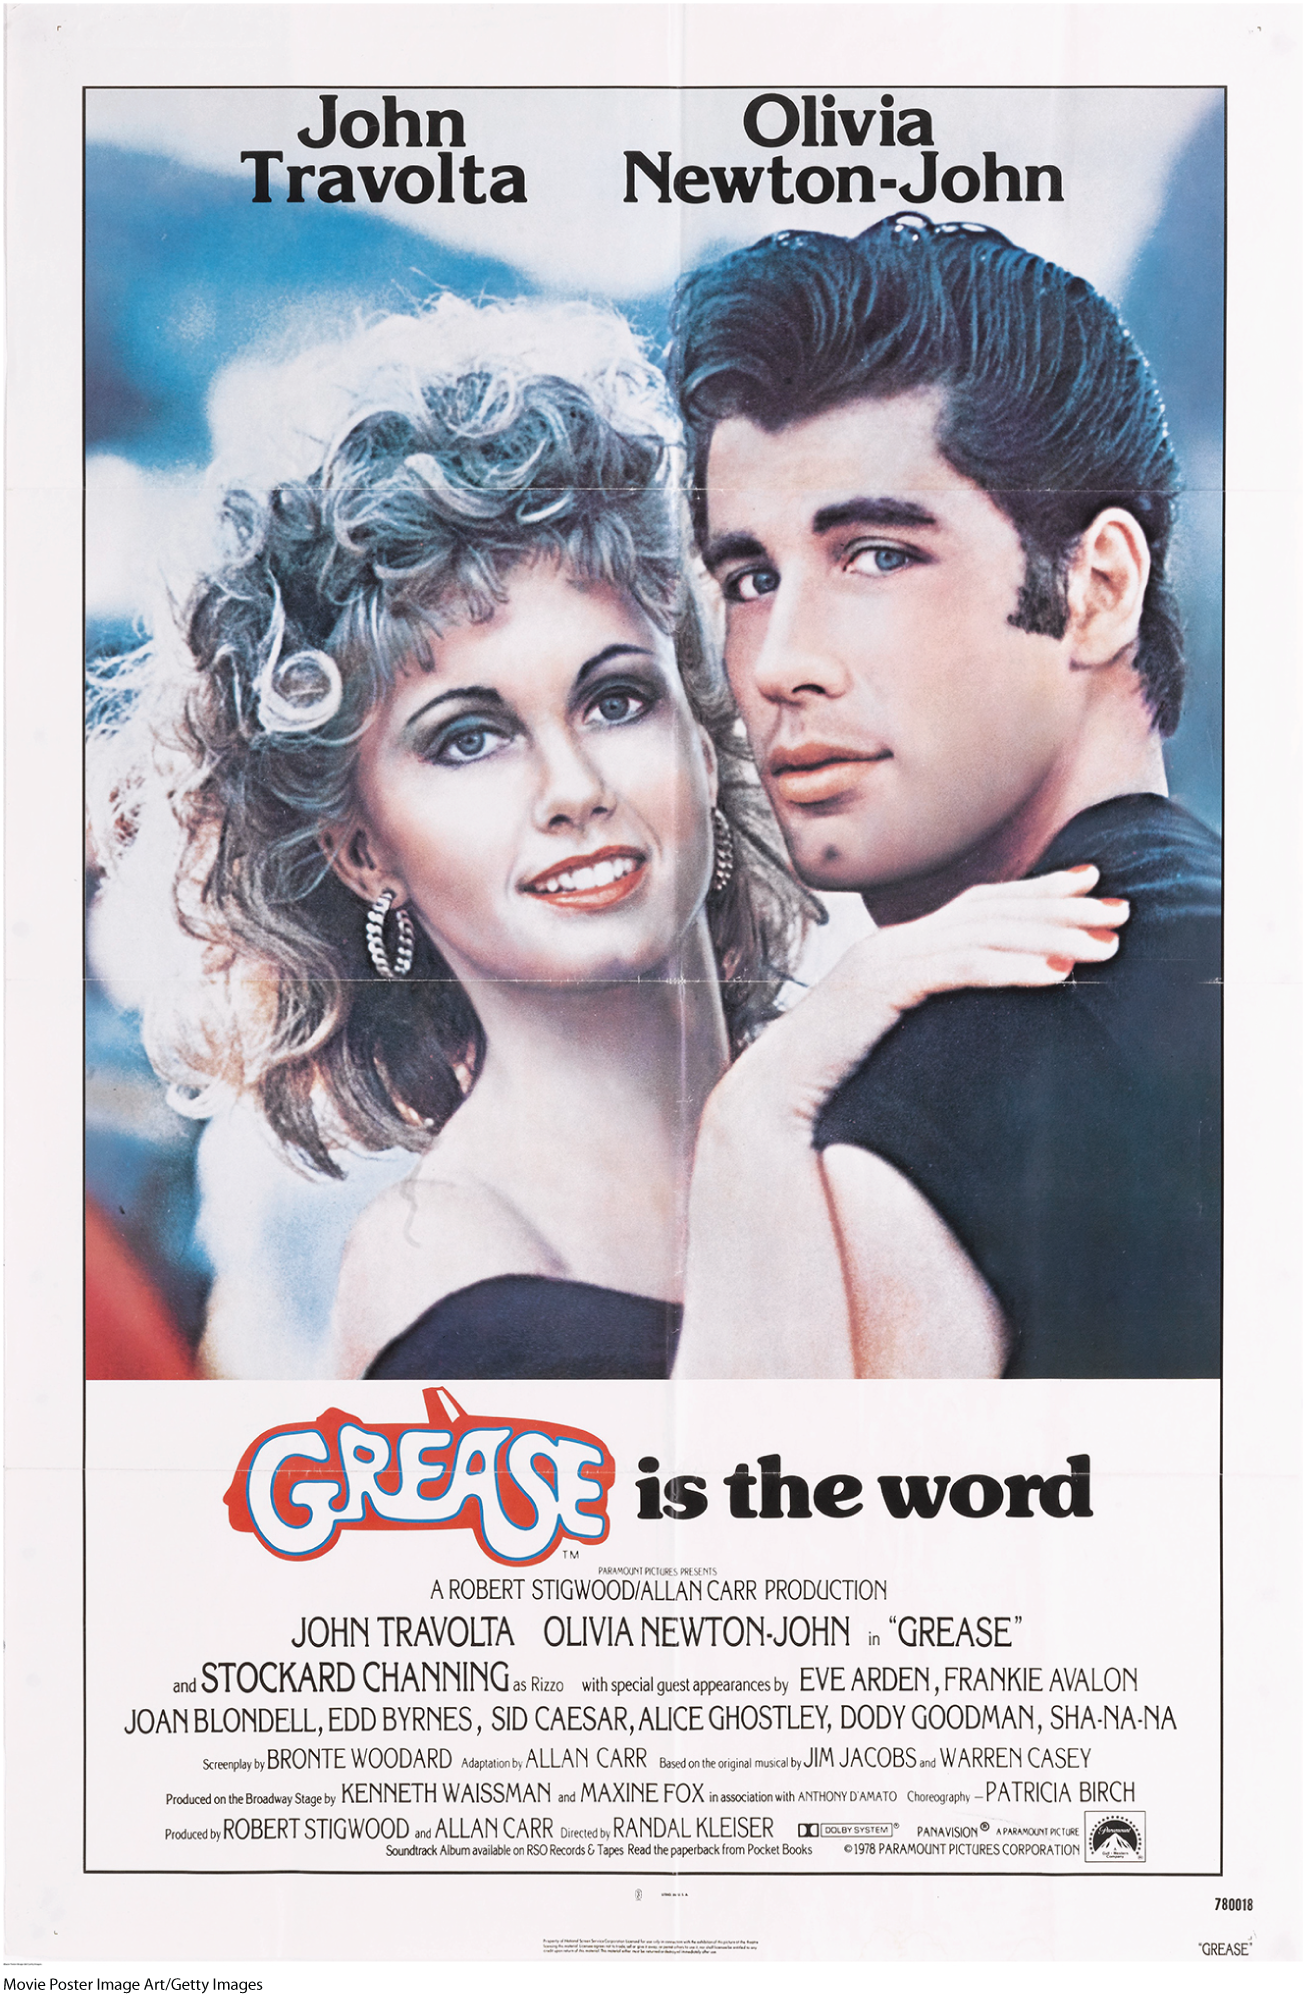 A movie poster is shown. The poster of the movie “GREASE” shows the name “John Travolta” above the image of a woman and the name “Olivia Newton-John” above the image of a man. The text below reads “Grease is the word.”